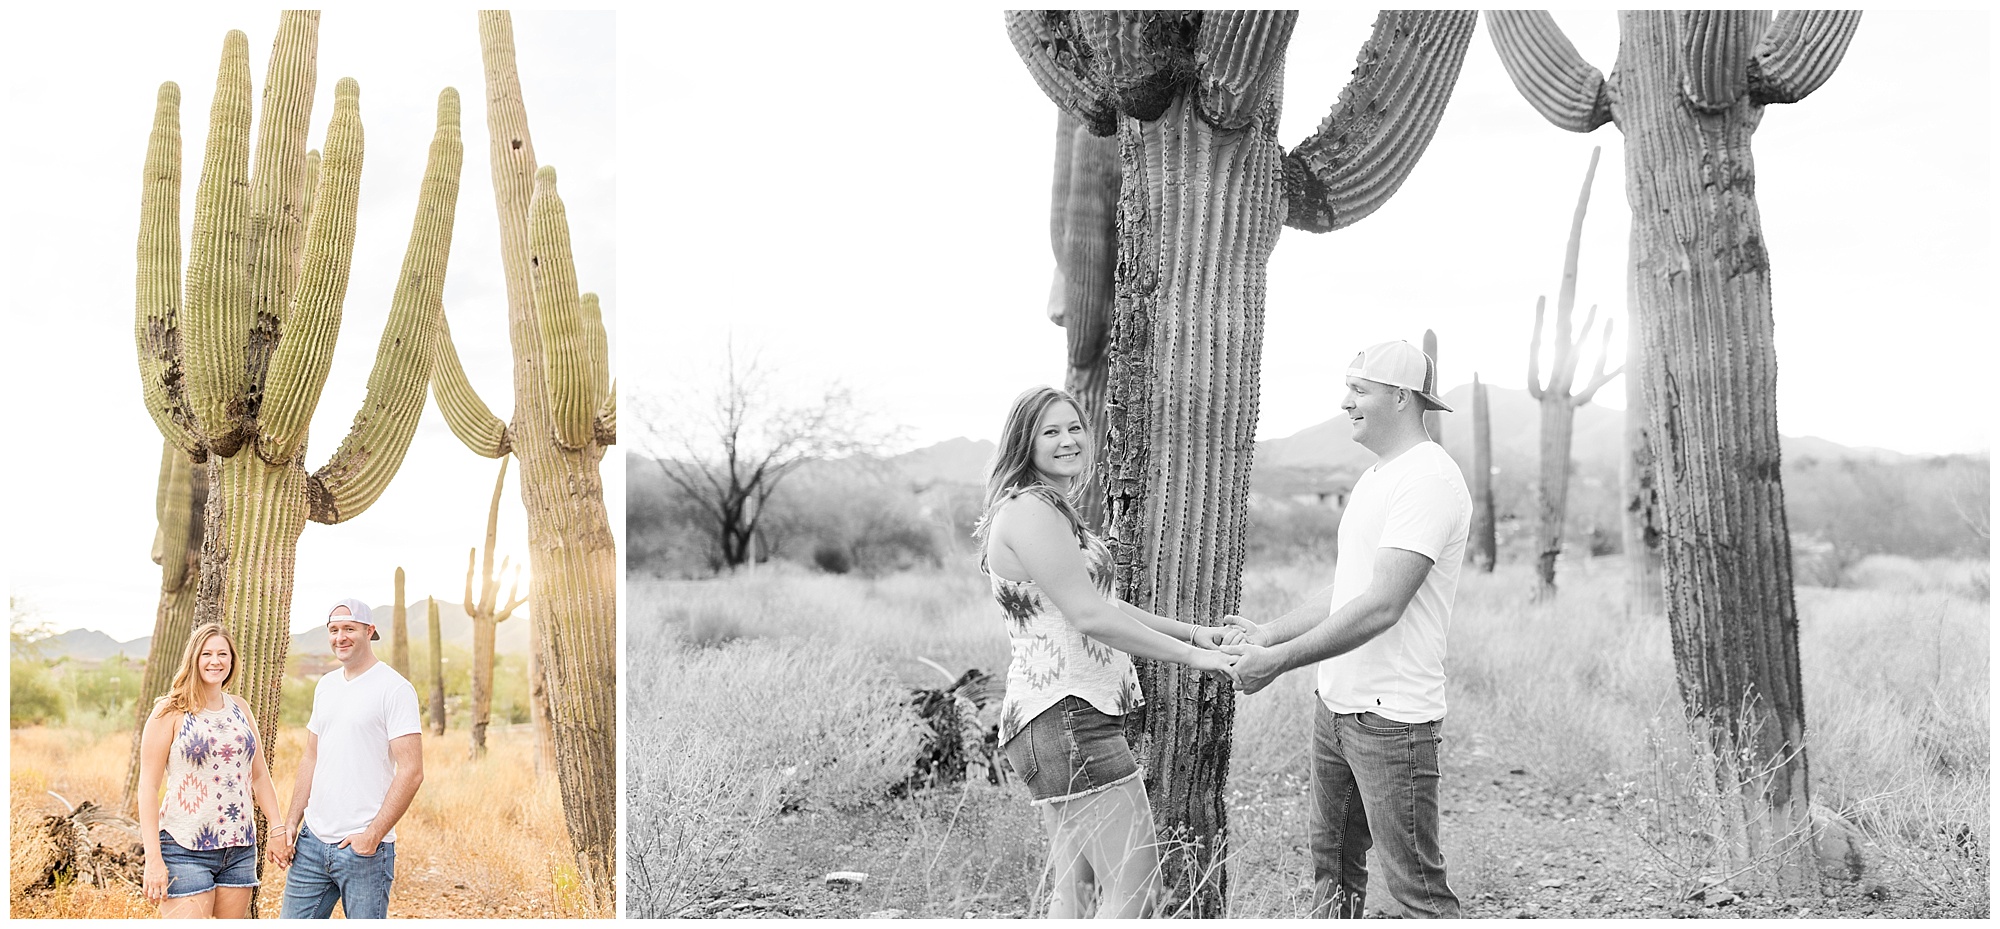 Connor and Katie's Saguaro Tortilla Flat Engagement Session